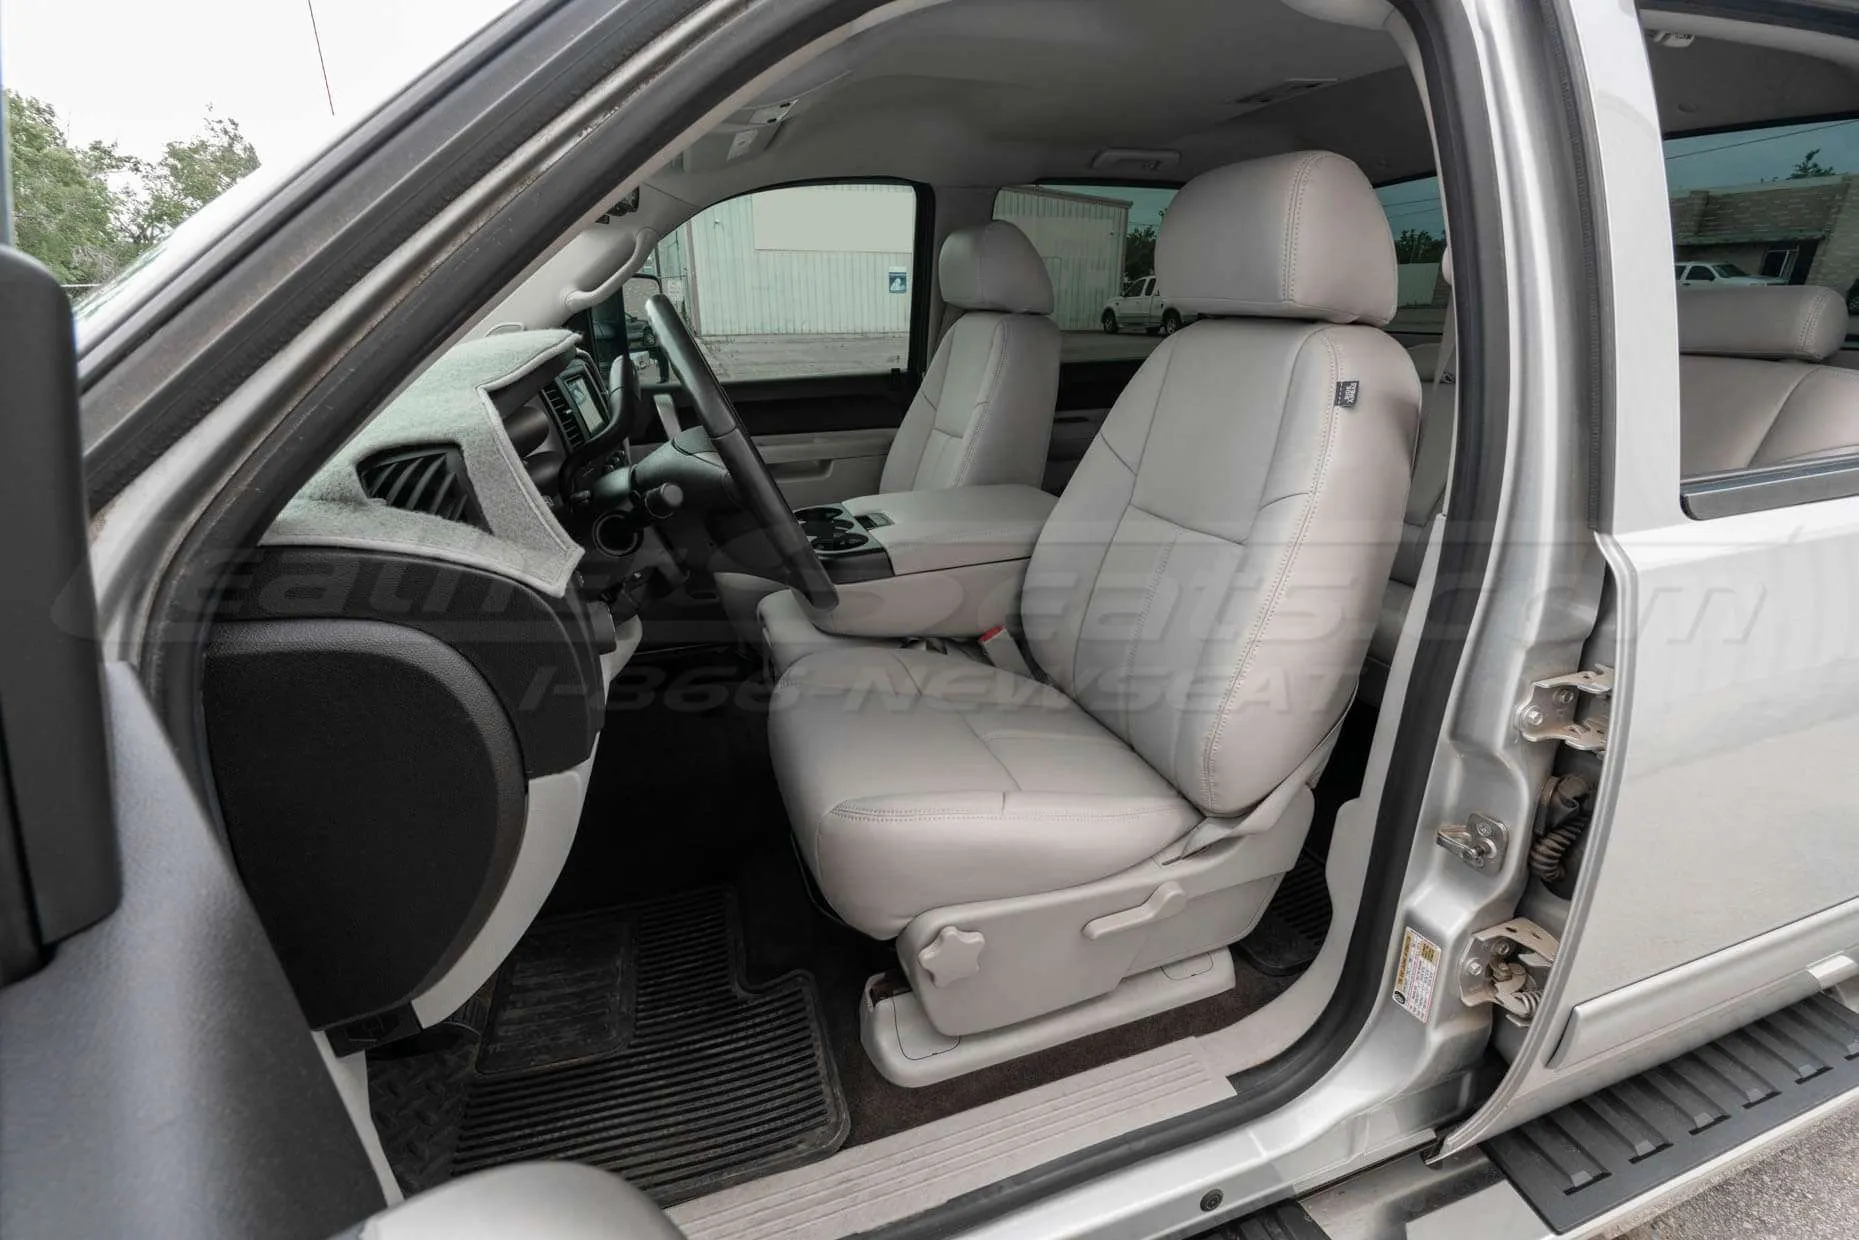 Installed Dove Grey Leather Seats for Chevy Silverado - Wide angle of front driver side